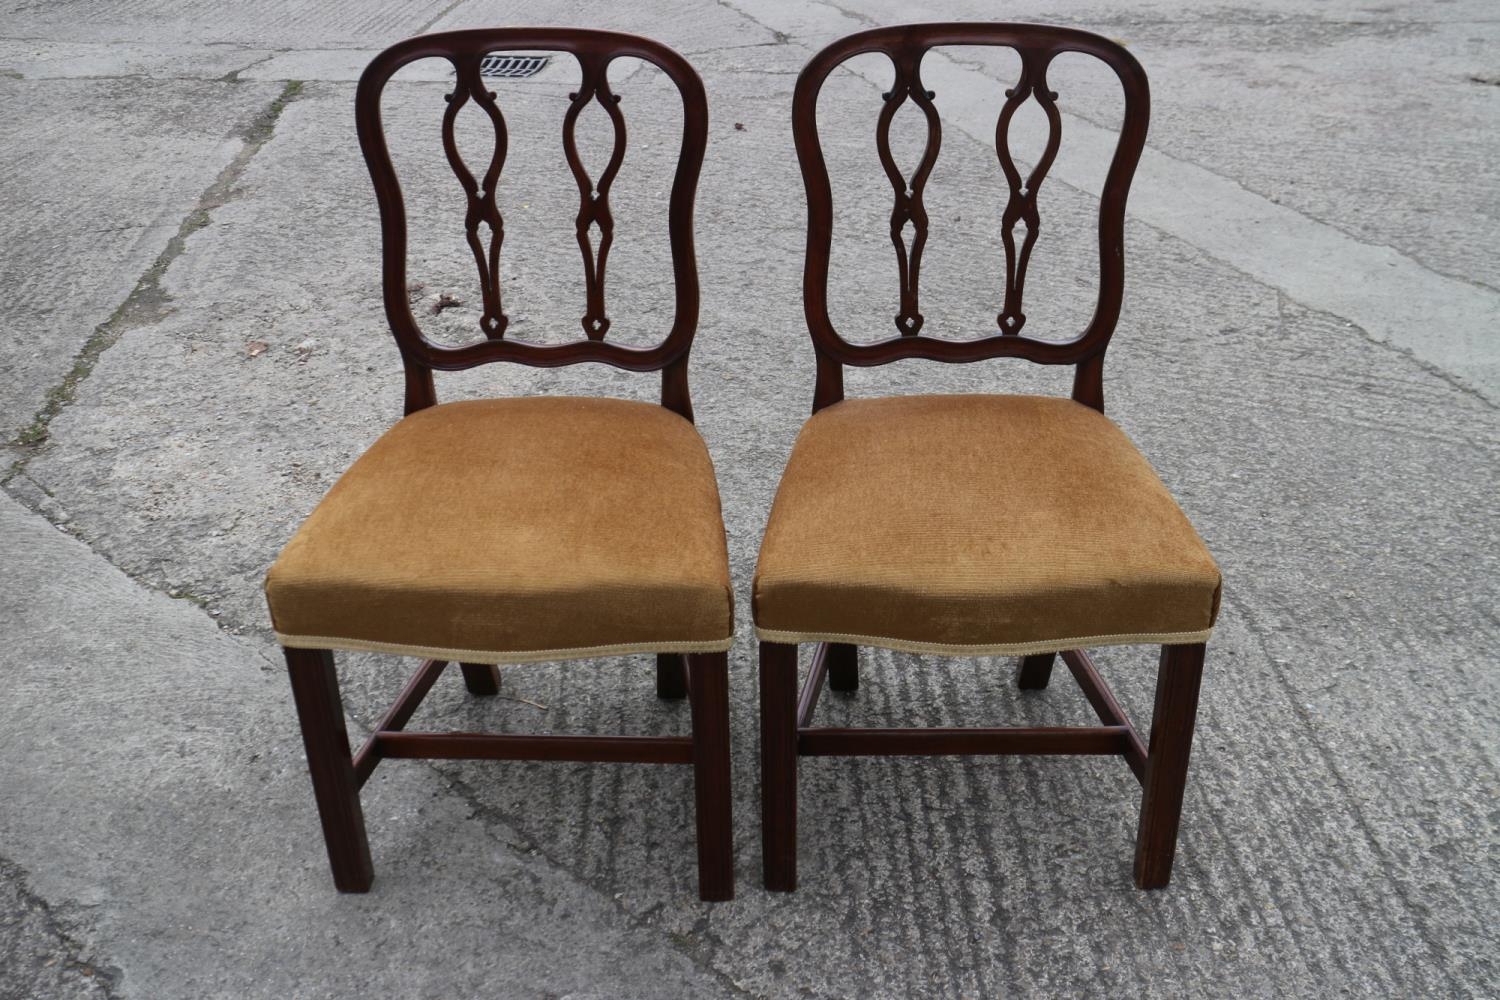 A pair of late Georgian mahogany shaped pierced twin splat dining chairs with serpentine stuffed